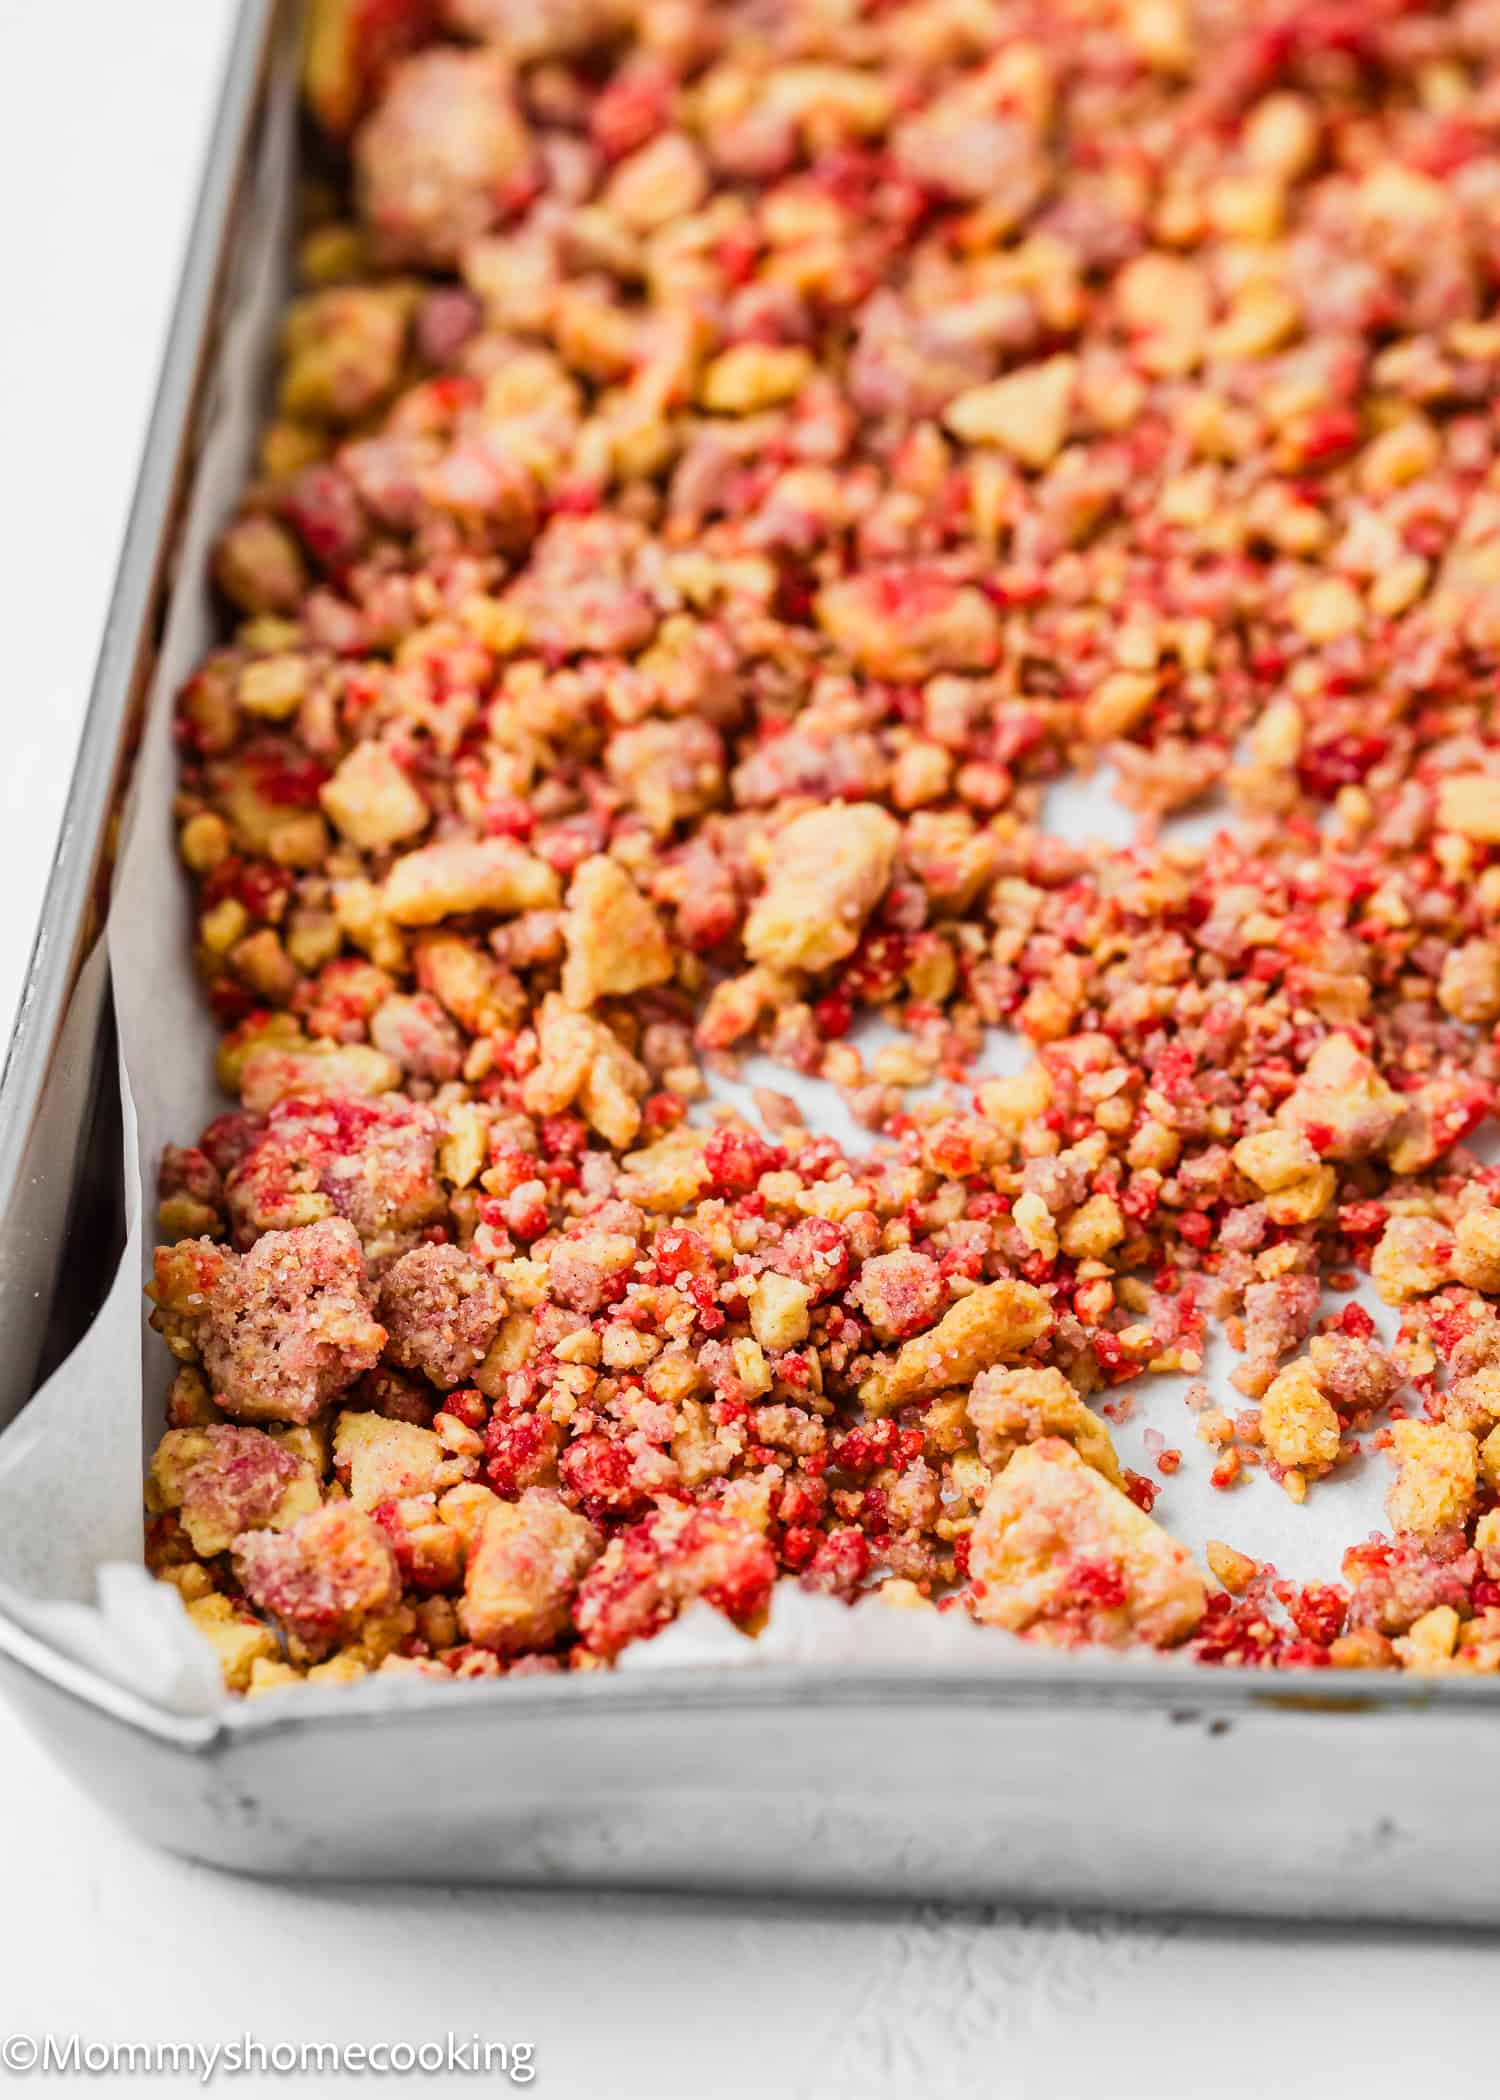 Strawberry Crunch topping in a baking tray.